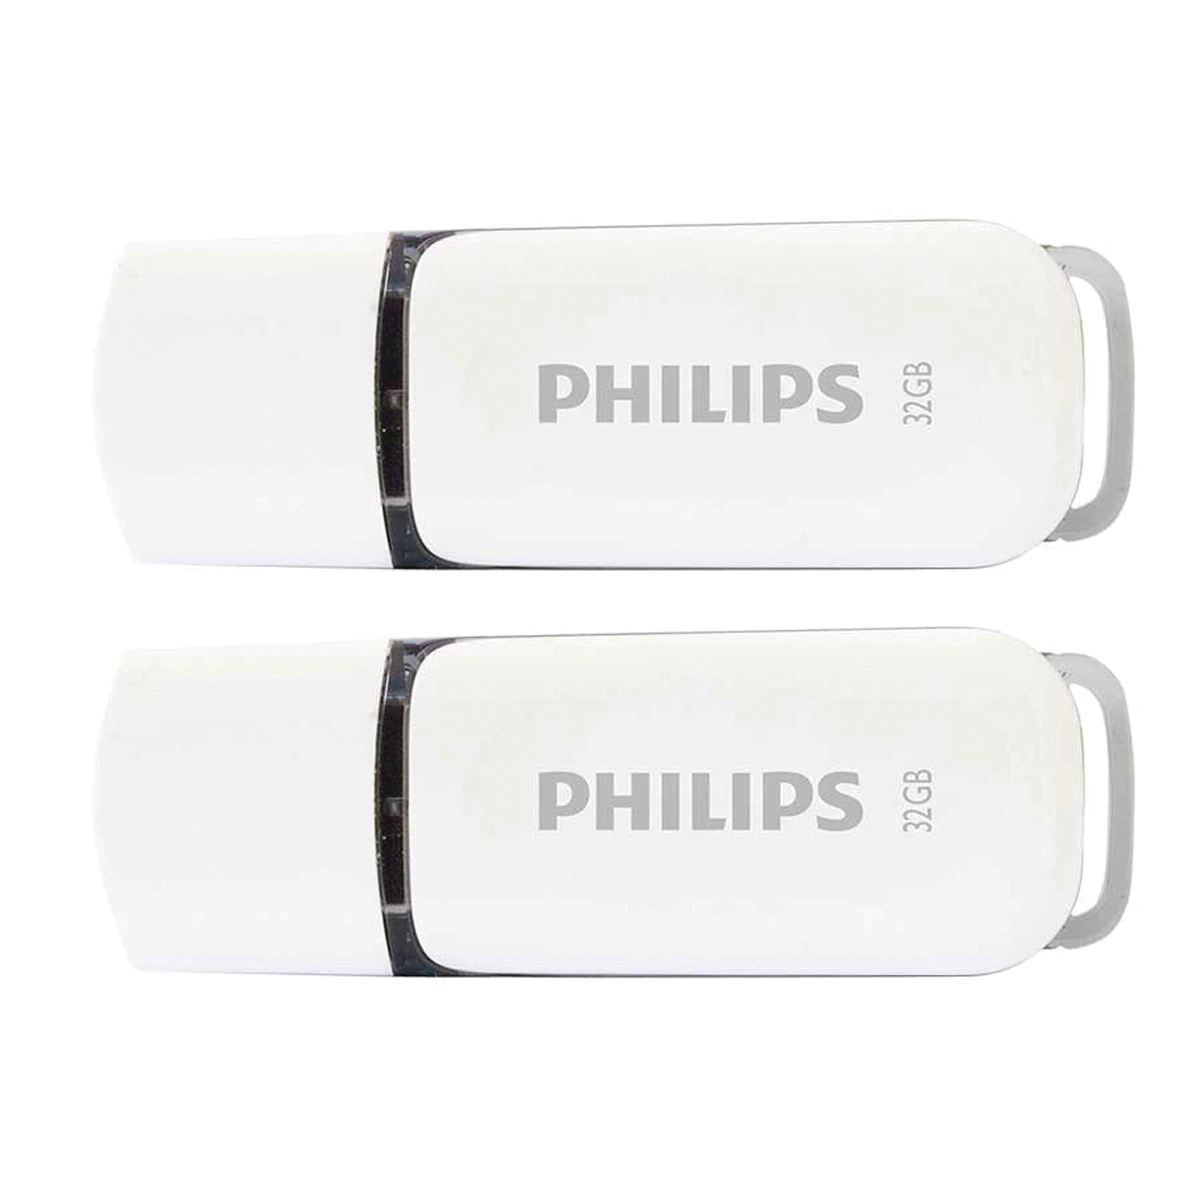 Pack 2 Pendrives Philips Snow USB 2.0 32 GB